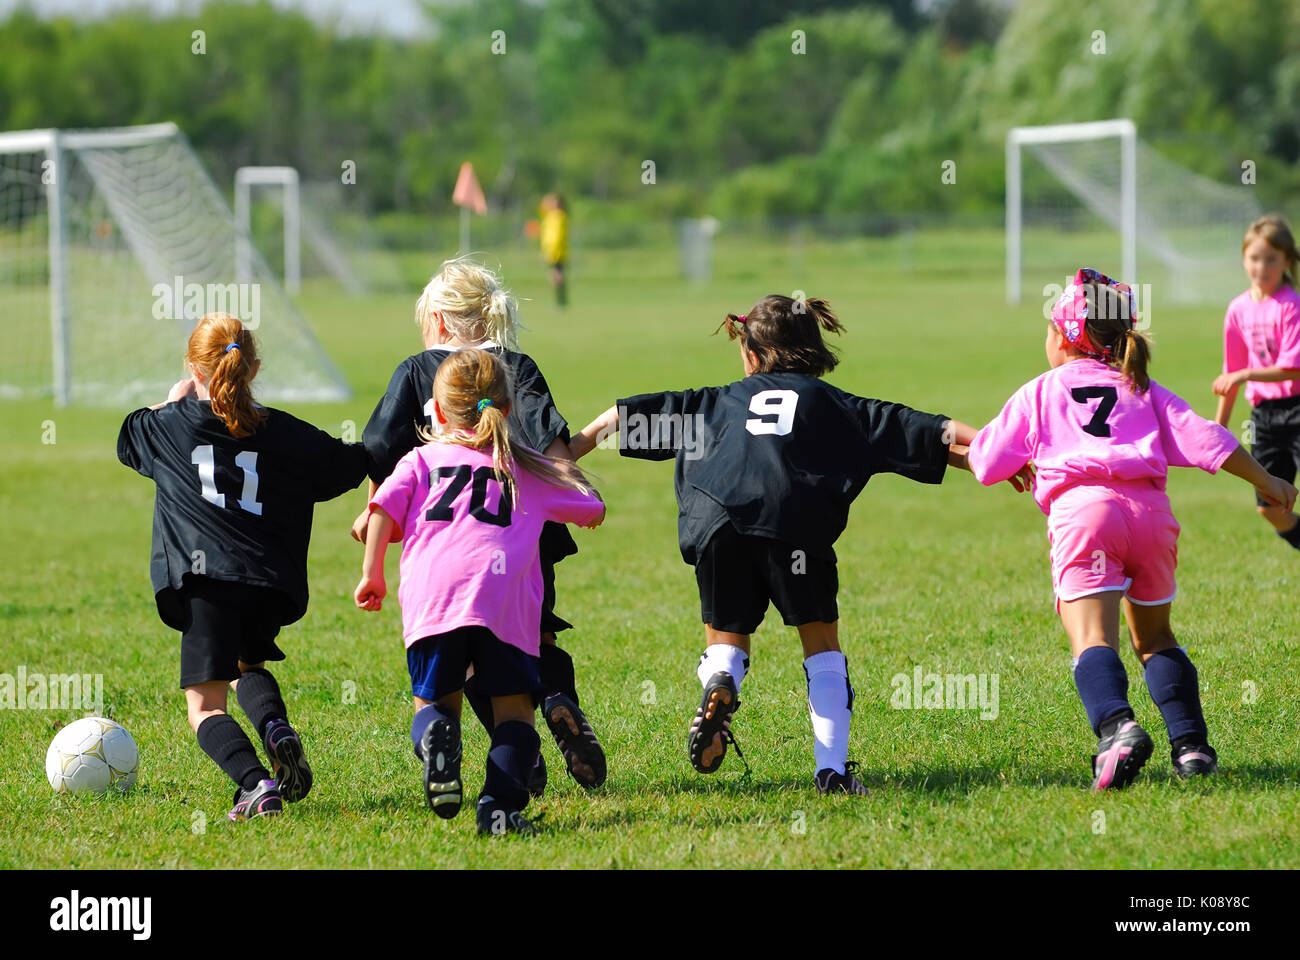 Two Girl's Soccer Teams race for the ball. Stock Photo